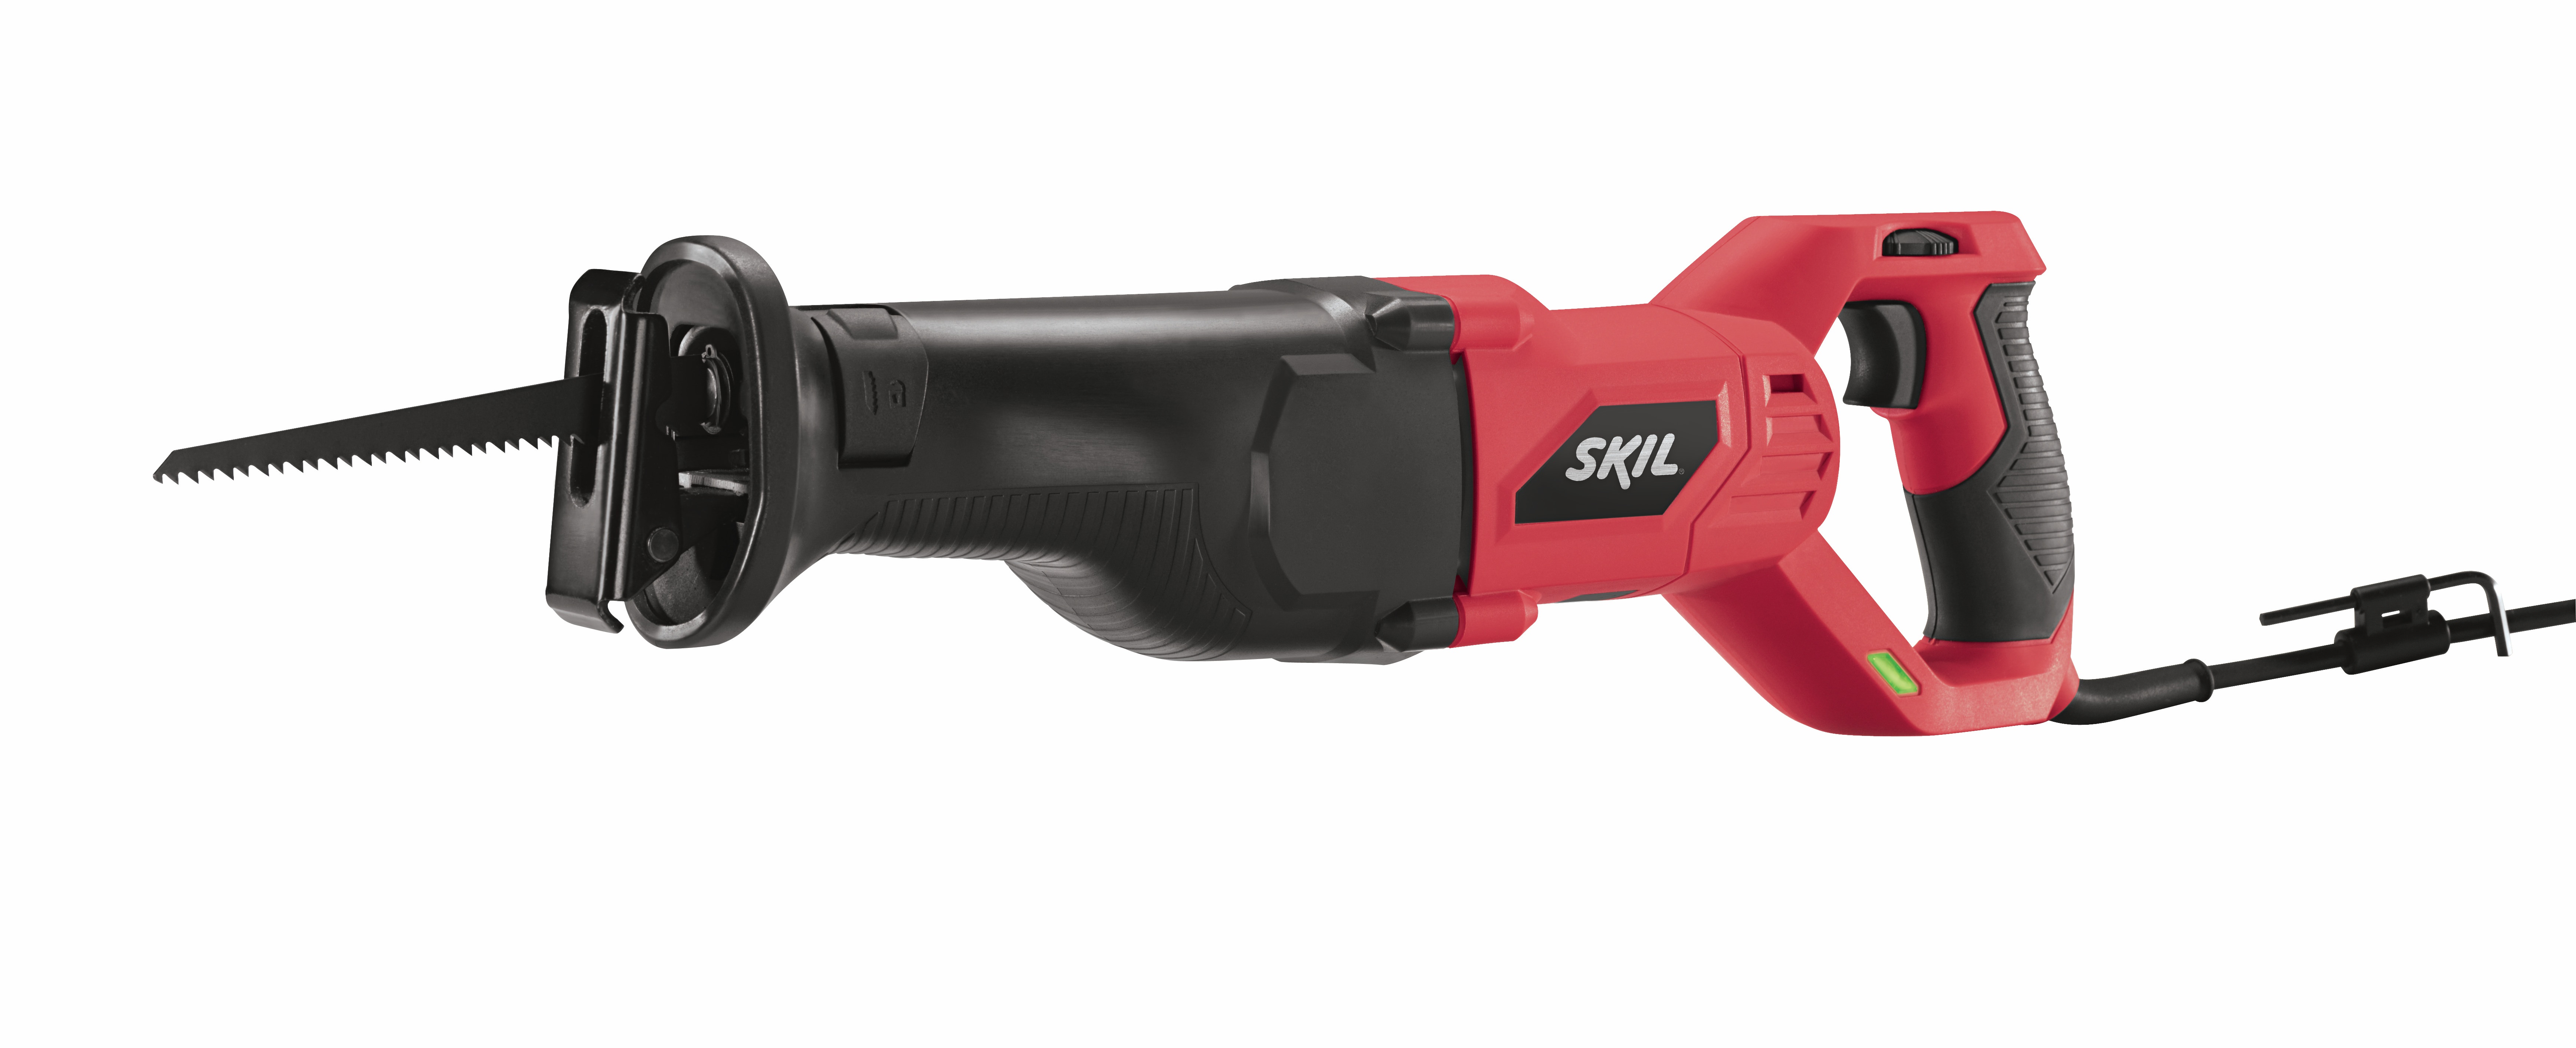 SKIL 9-Amp Reciprocating Saw with Quick Change, Corded, 9216-01 